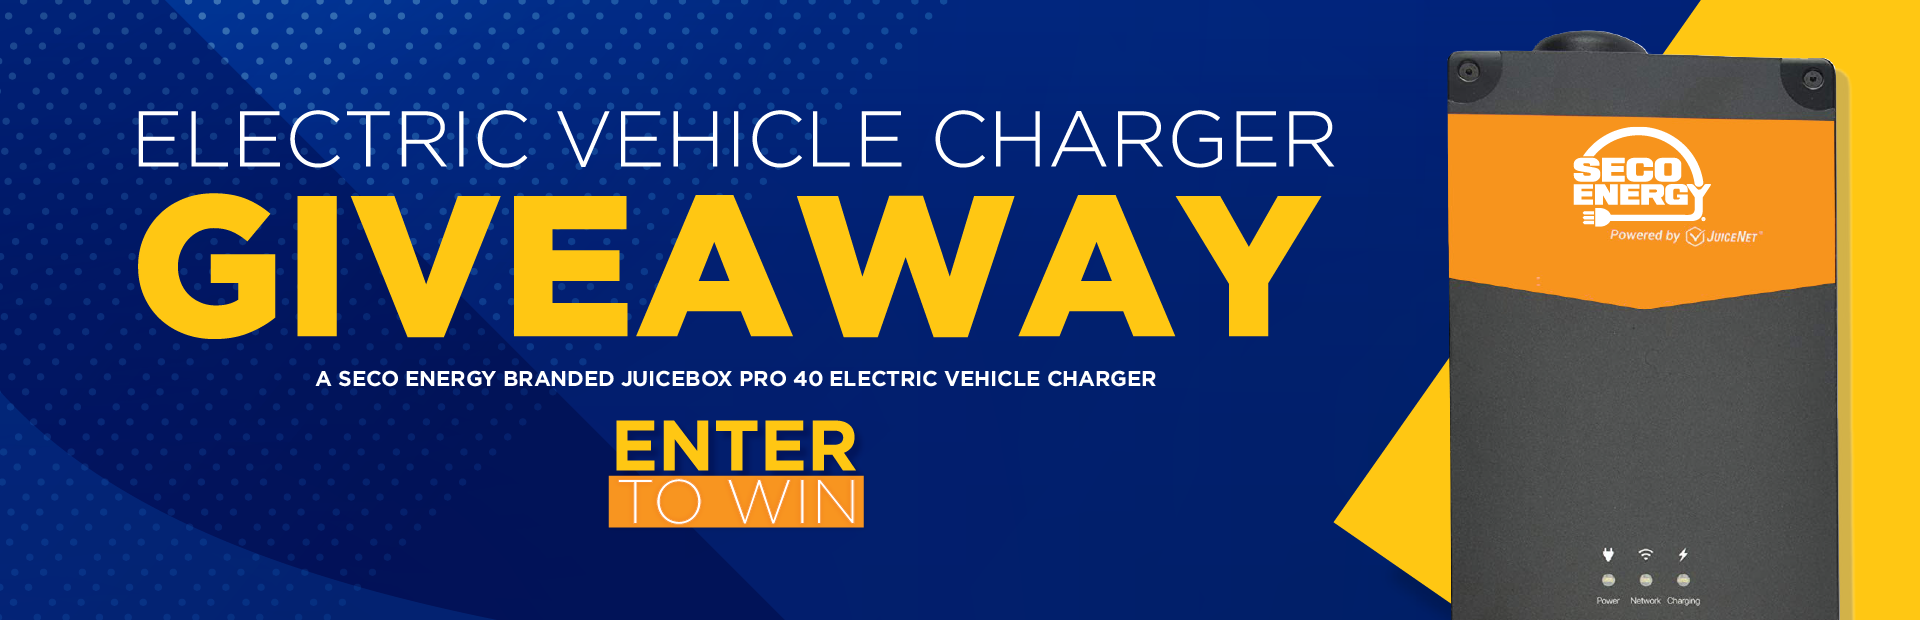 Electric Vehicle Charger Giveaway Homepage Banner